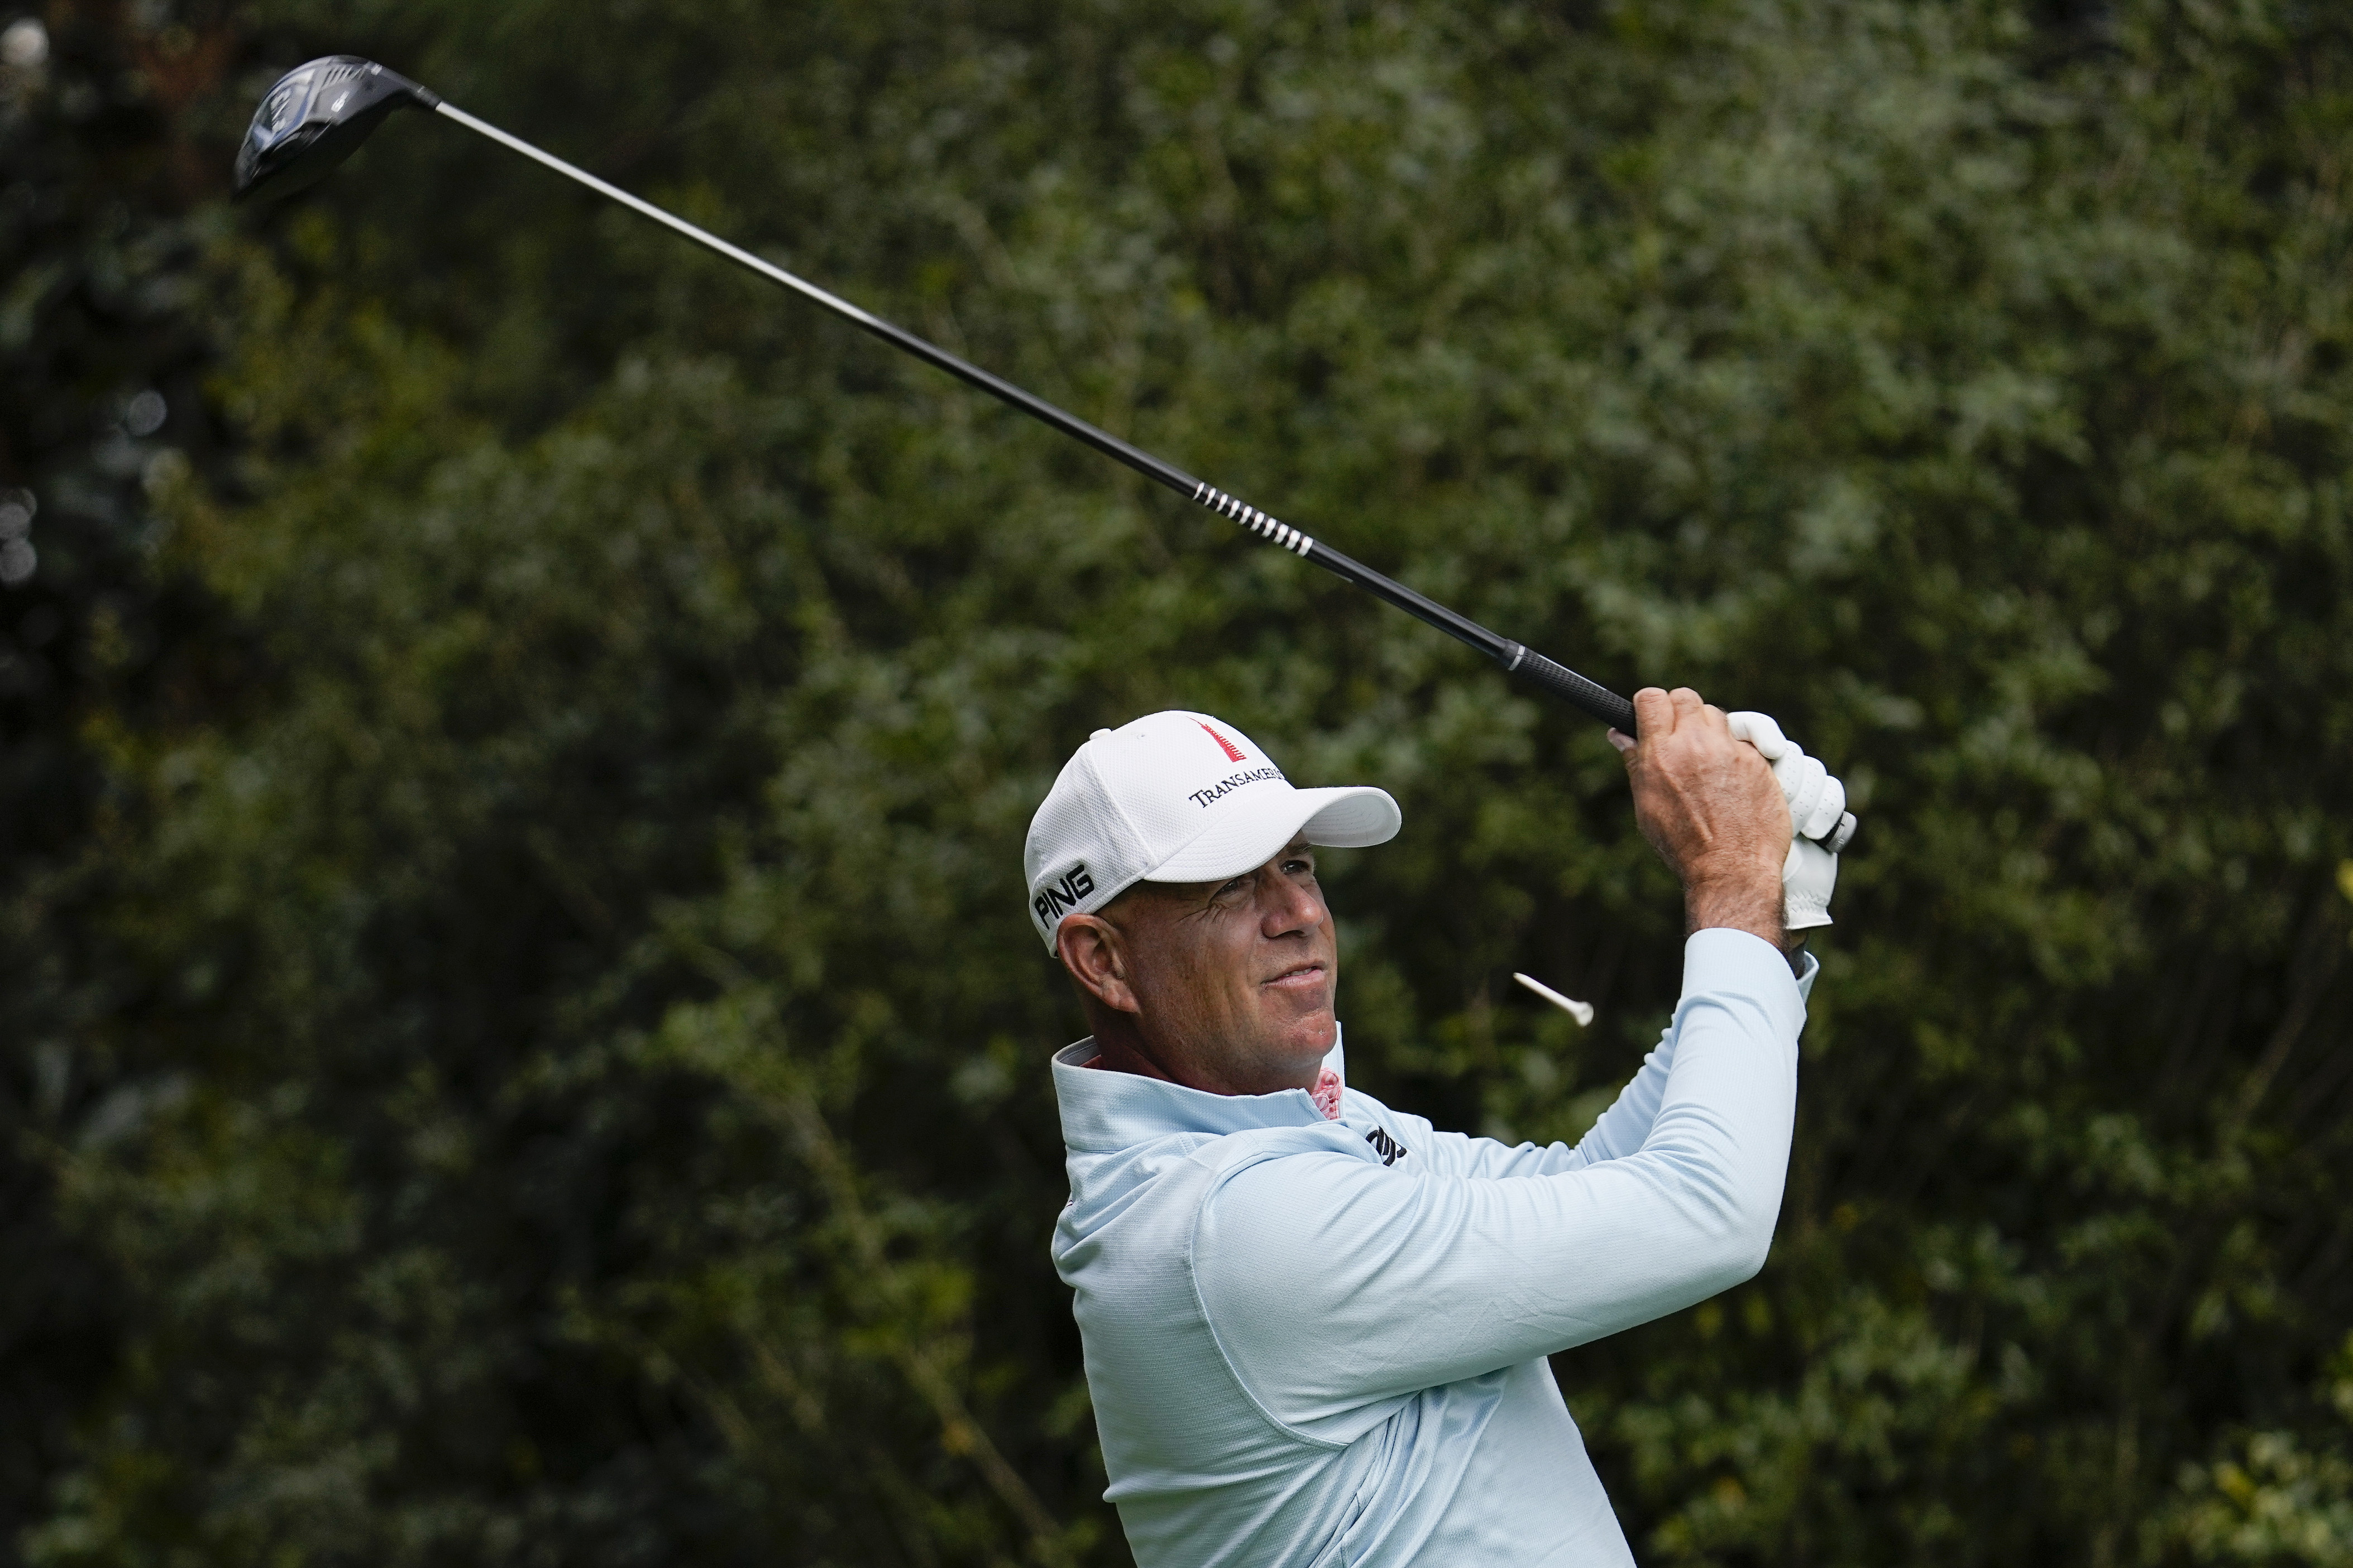 Video: Stewart Cink Drains Hole-in-One on No. 16 at 2022 Masters